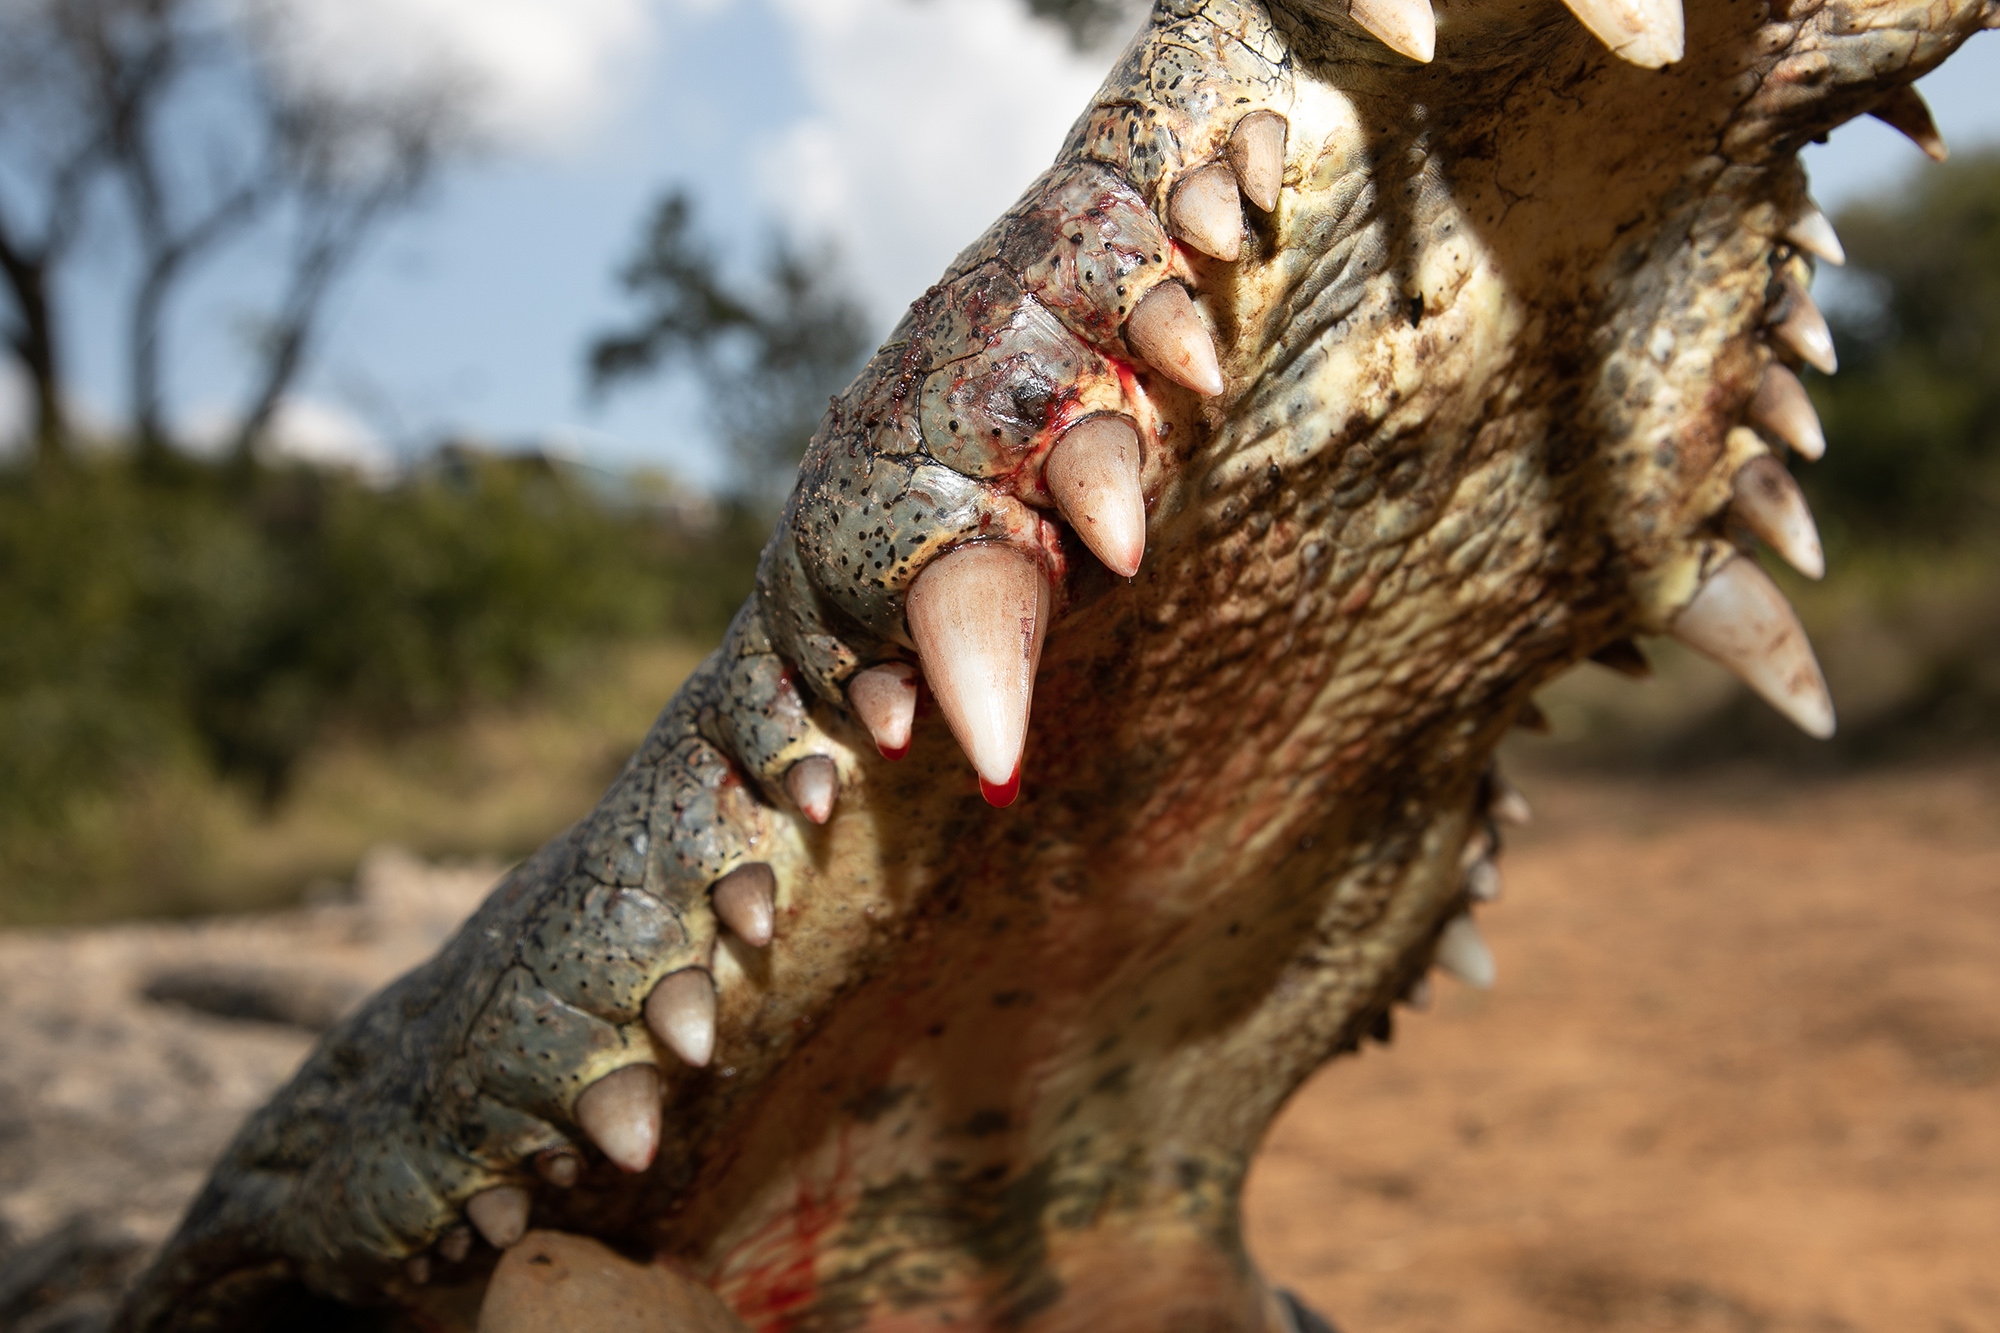 A drop of blood on the tooth of a crocodile.